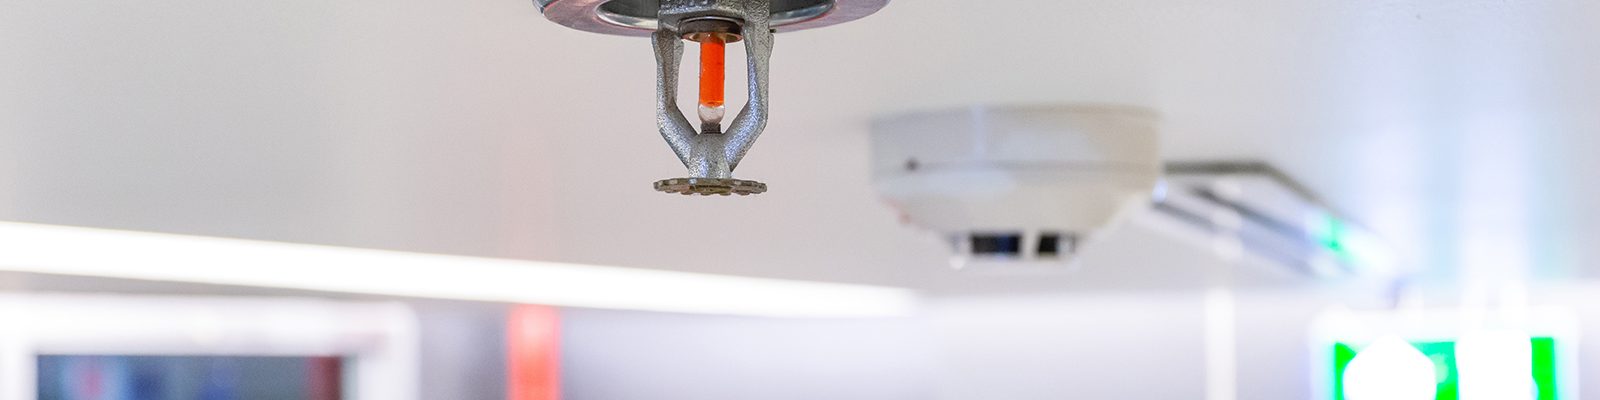 How Important is Maintaining a Fire Sprinkler System for Business?